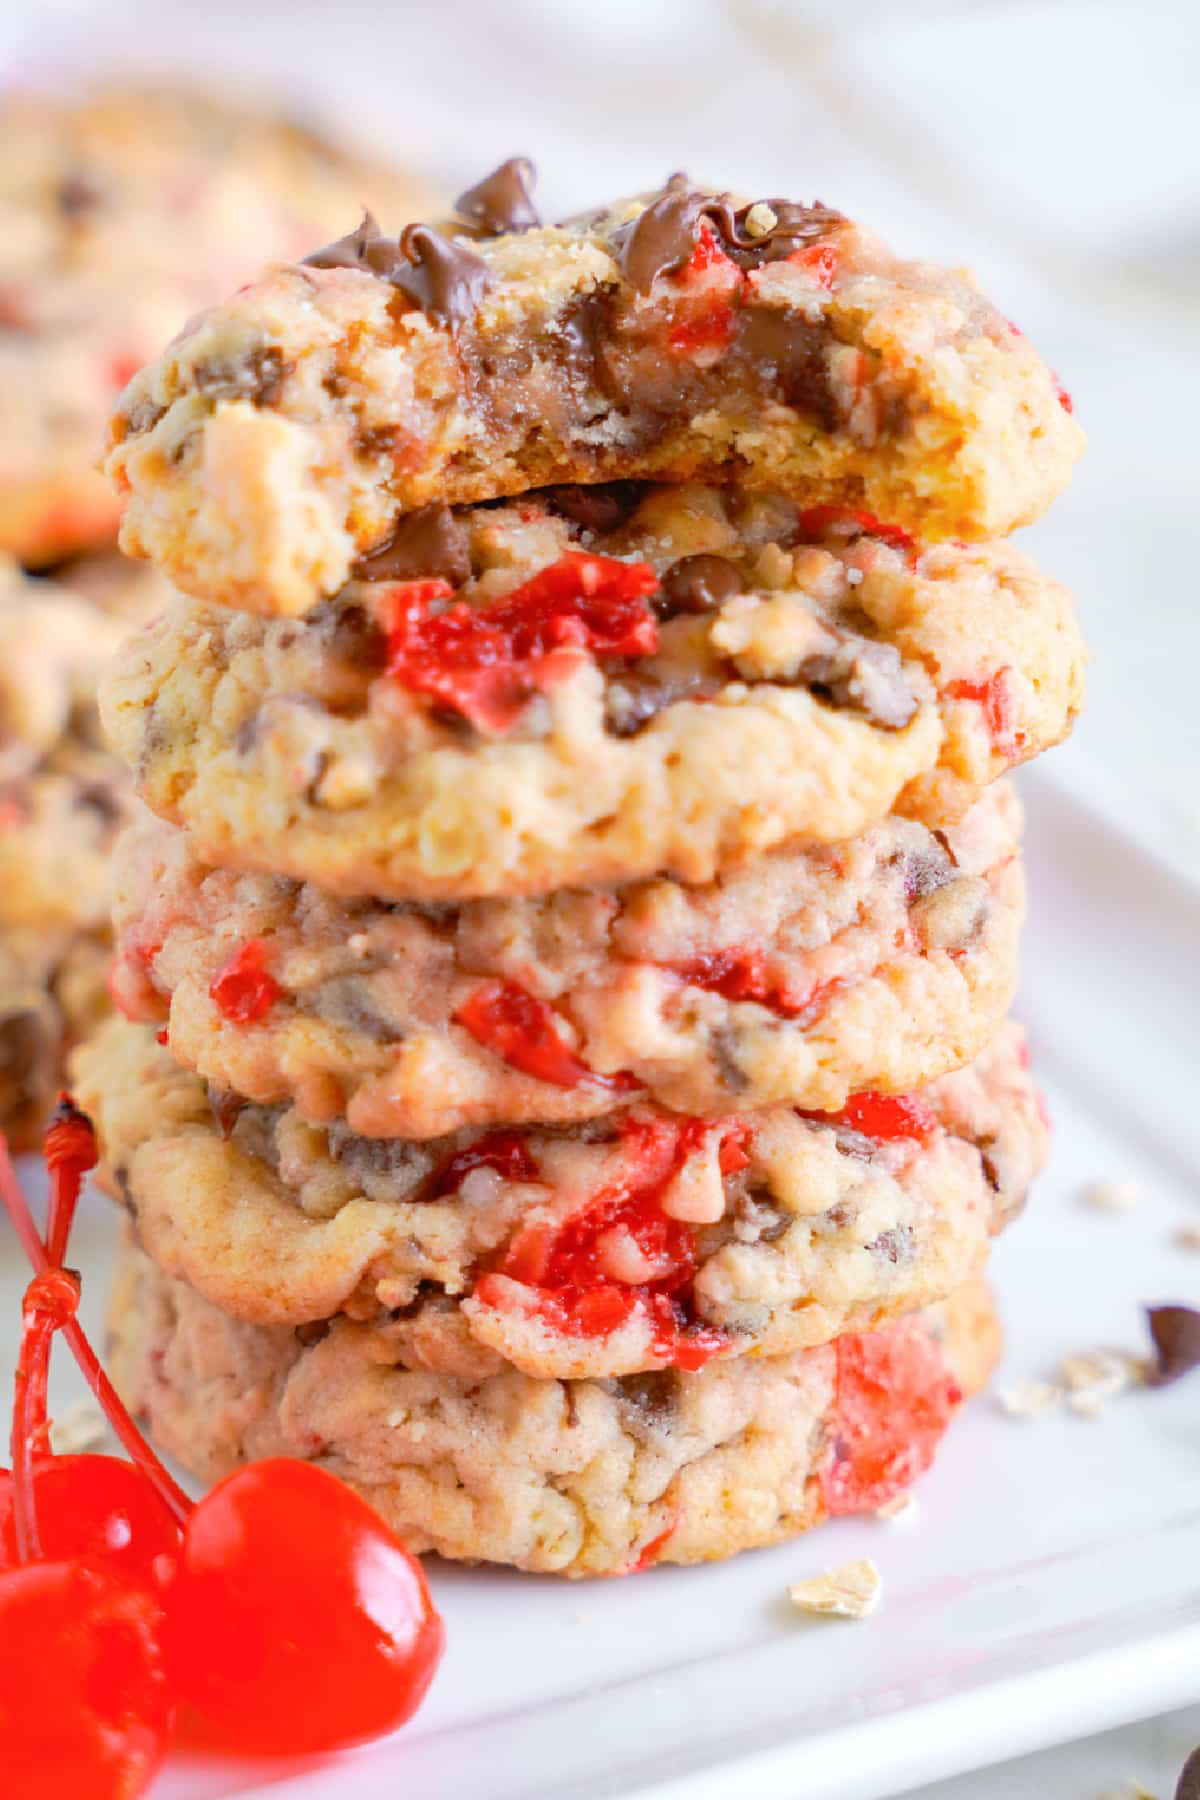 A stack of maraschino cherry cookies chocolate chip cookies with the top cookie missing a bite.